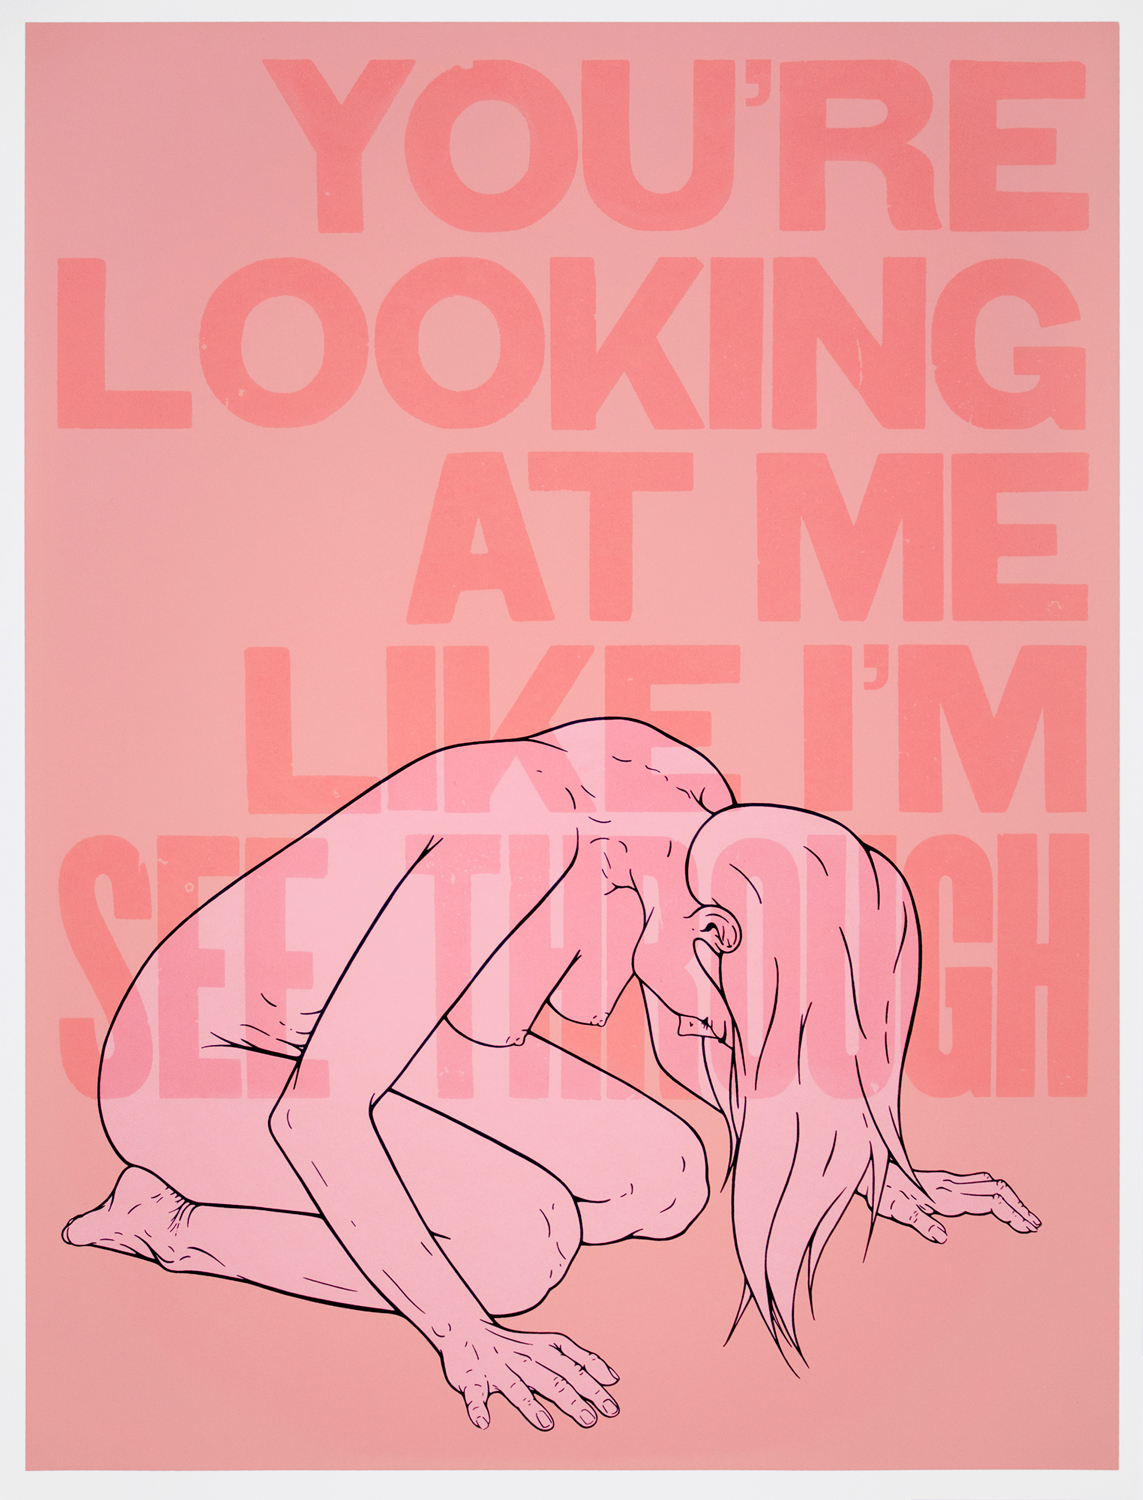 You're Looking At Me Like I'm See Through, screenprint, 28 by 22 inches, 2020